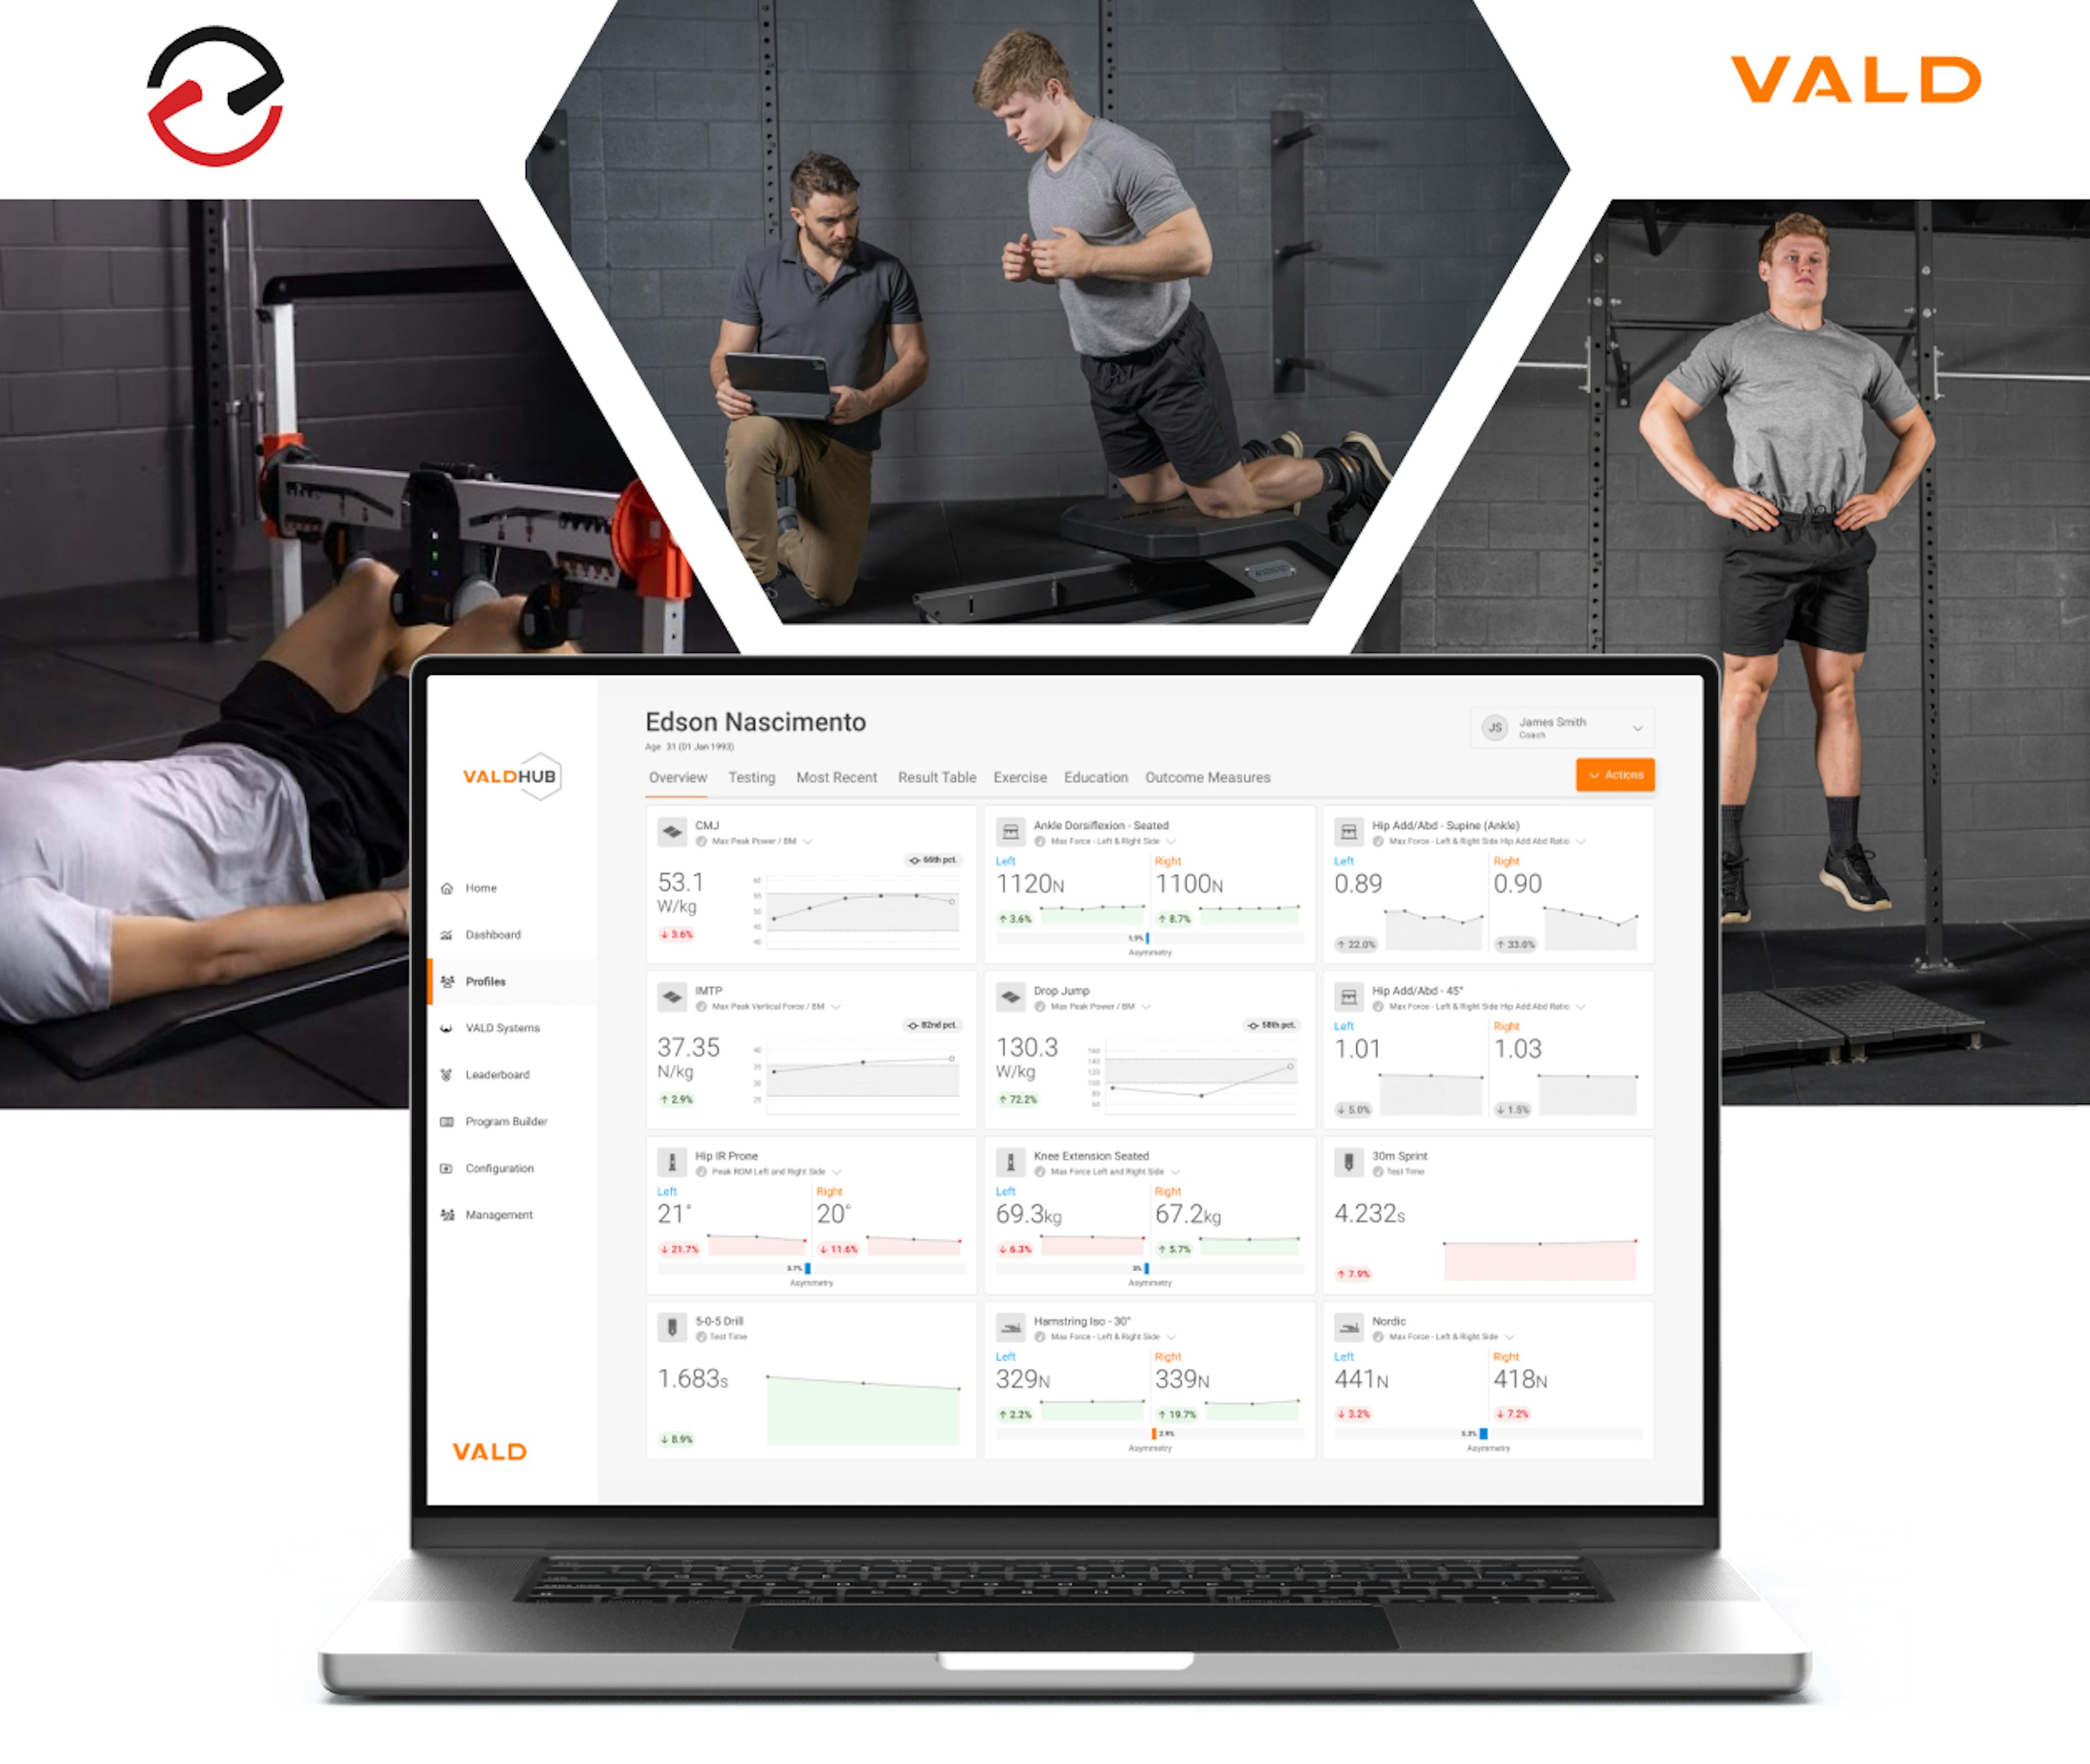 An example of an athlete profile overview in VALD Hub.